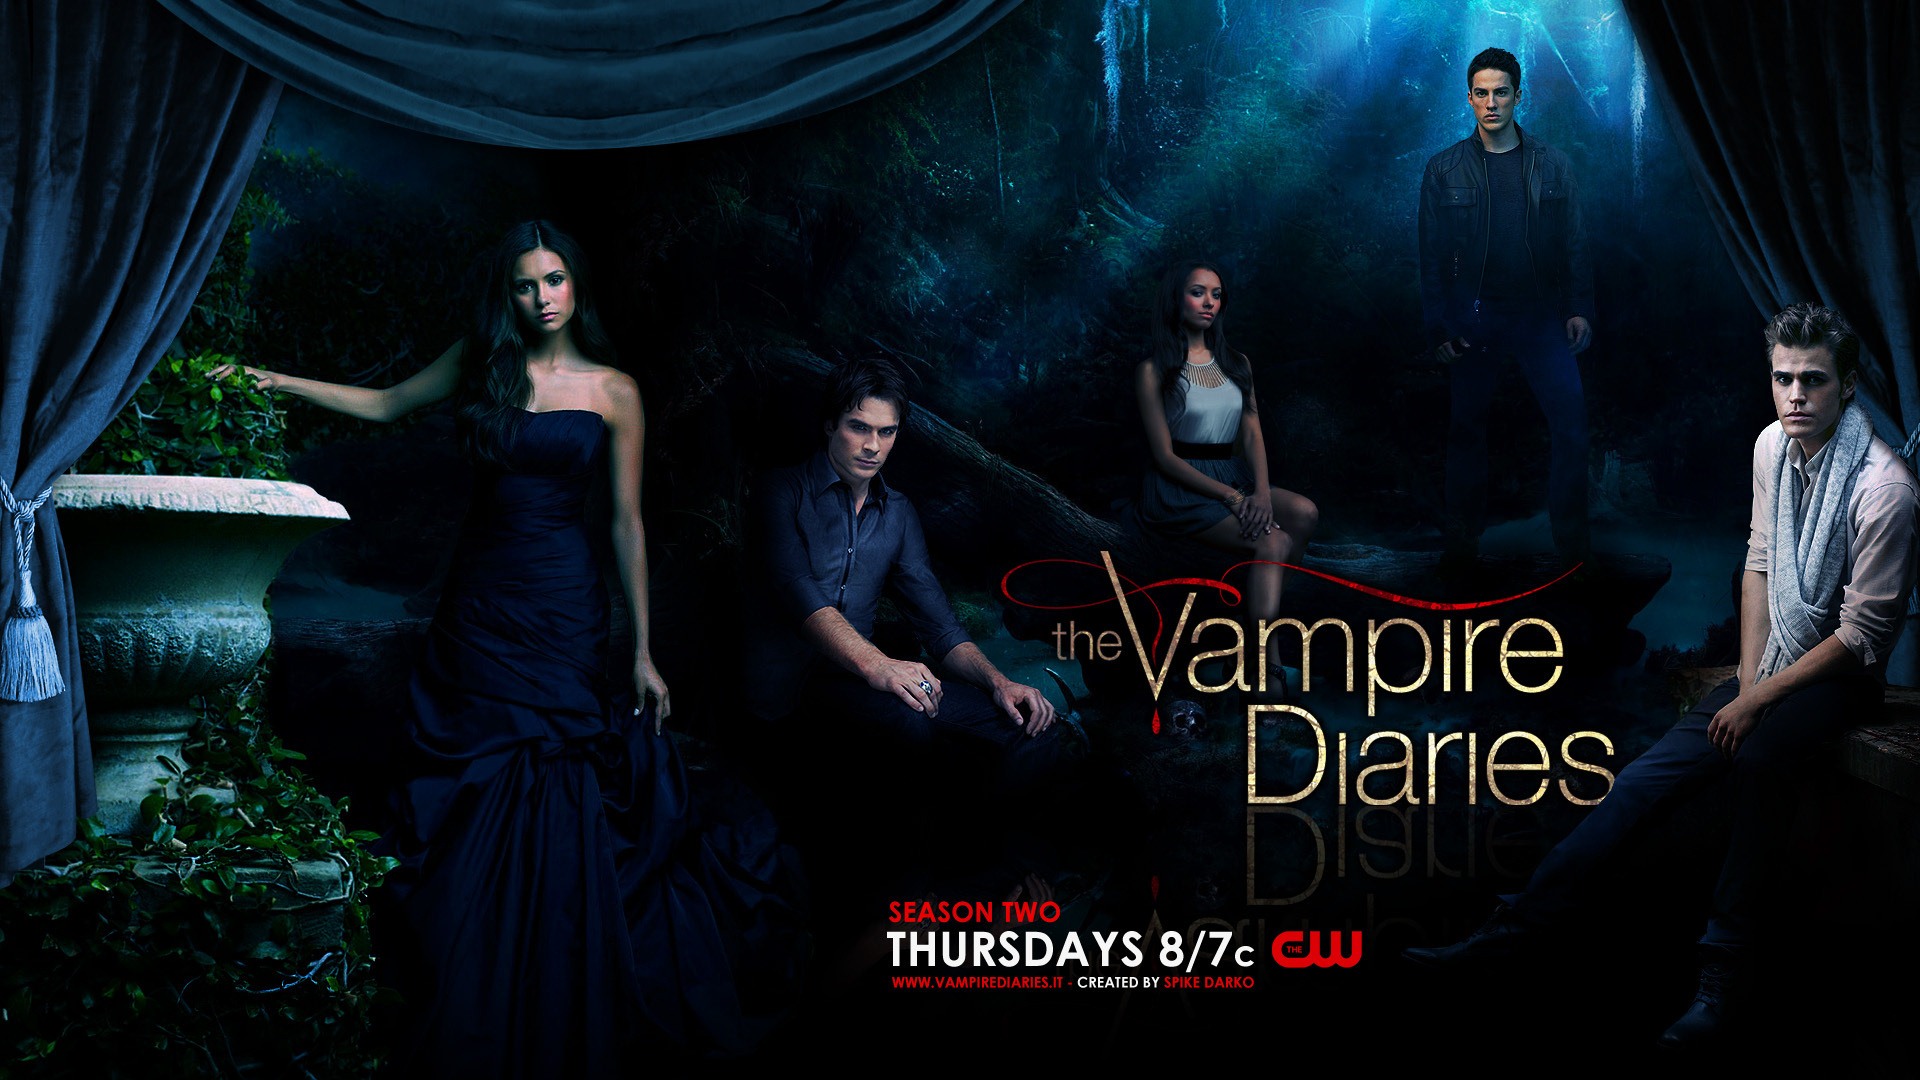 The Vampire Diaries wallpapers HD #18 - 1920x1080